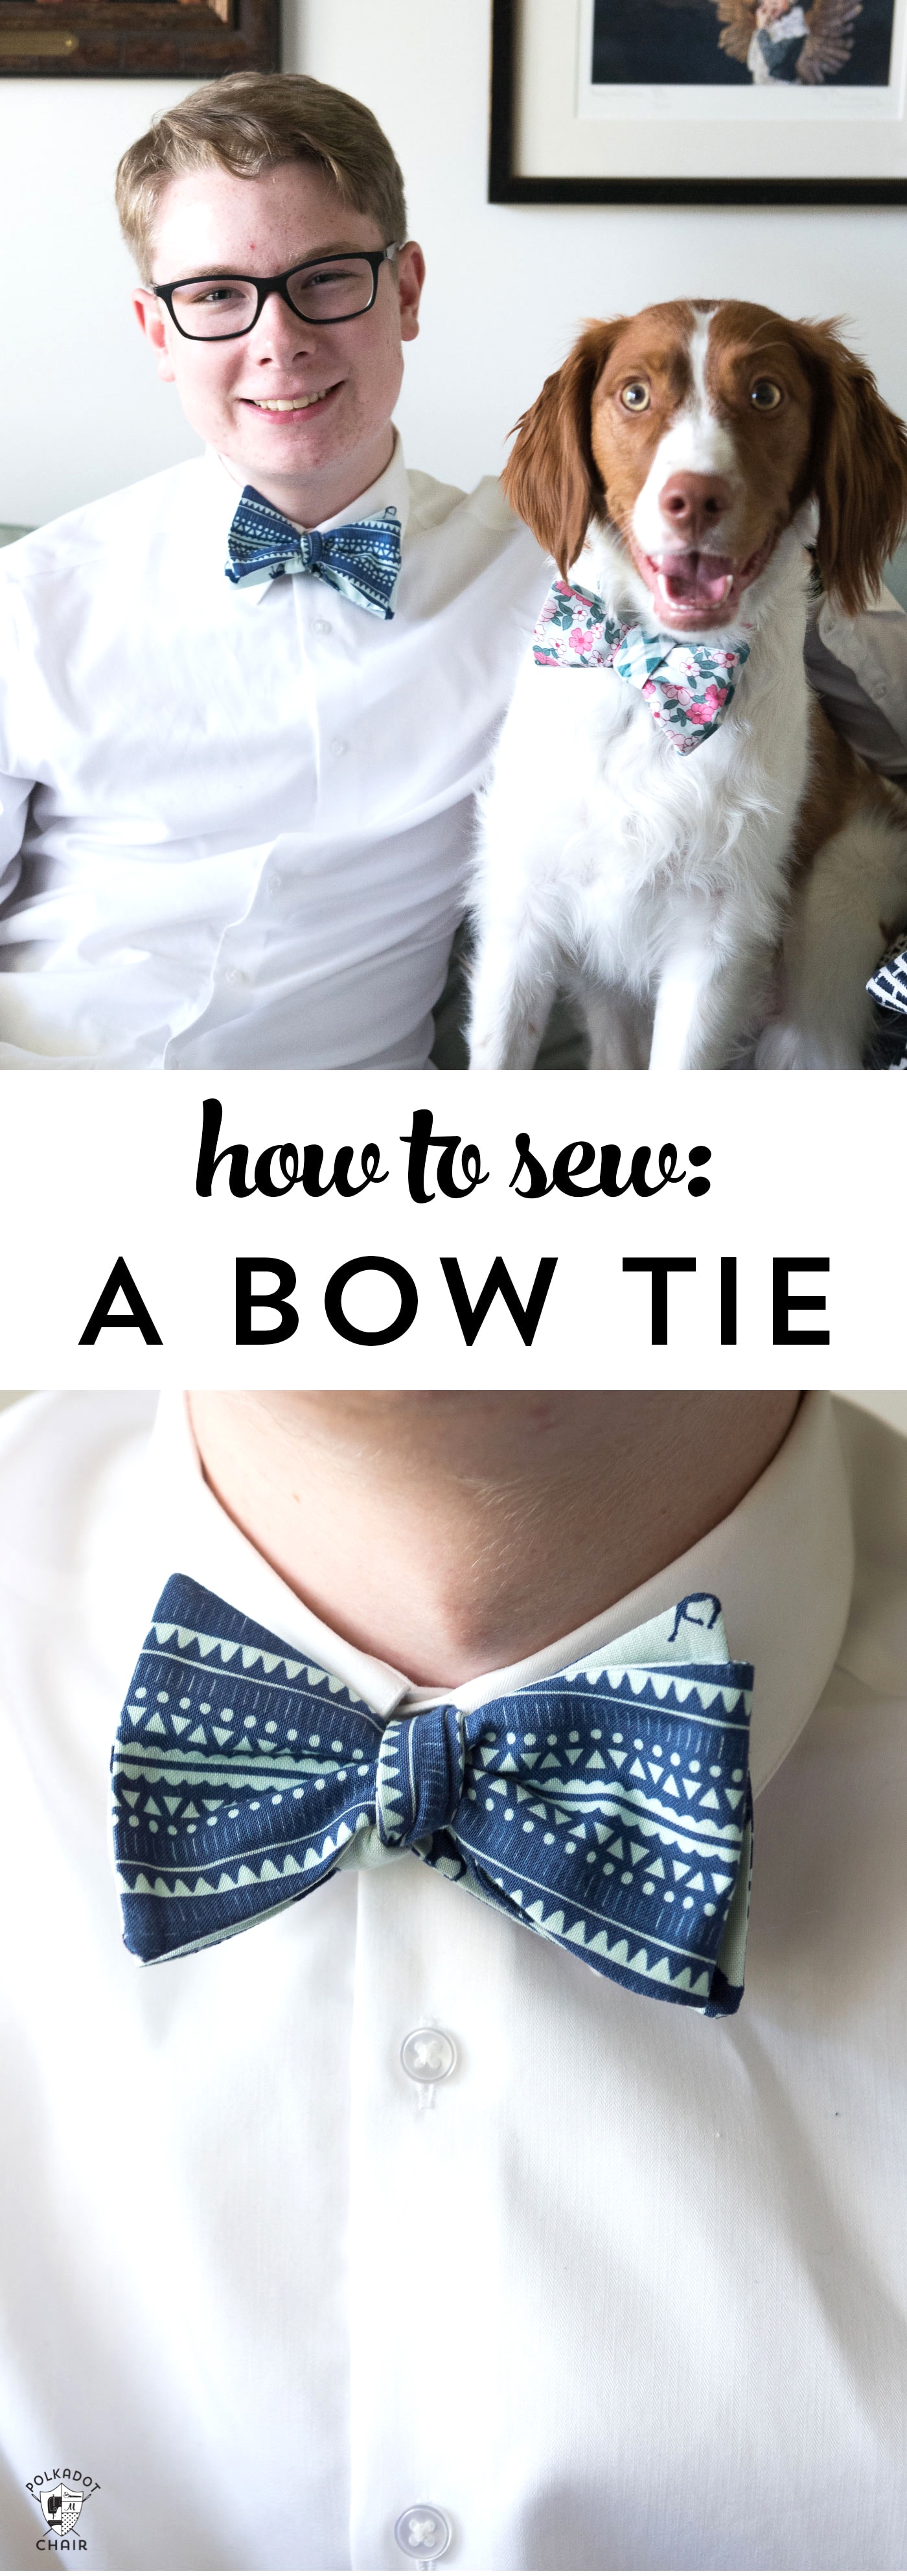 how-to-sew-bow-tie-pinterest-copy-the-polka-dot-chair